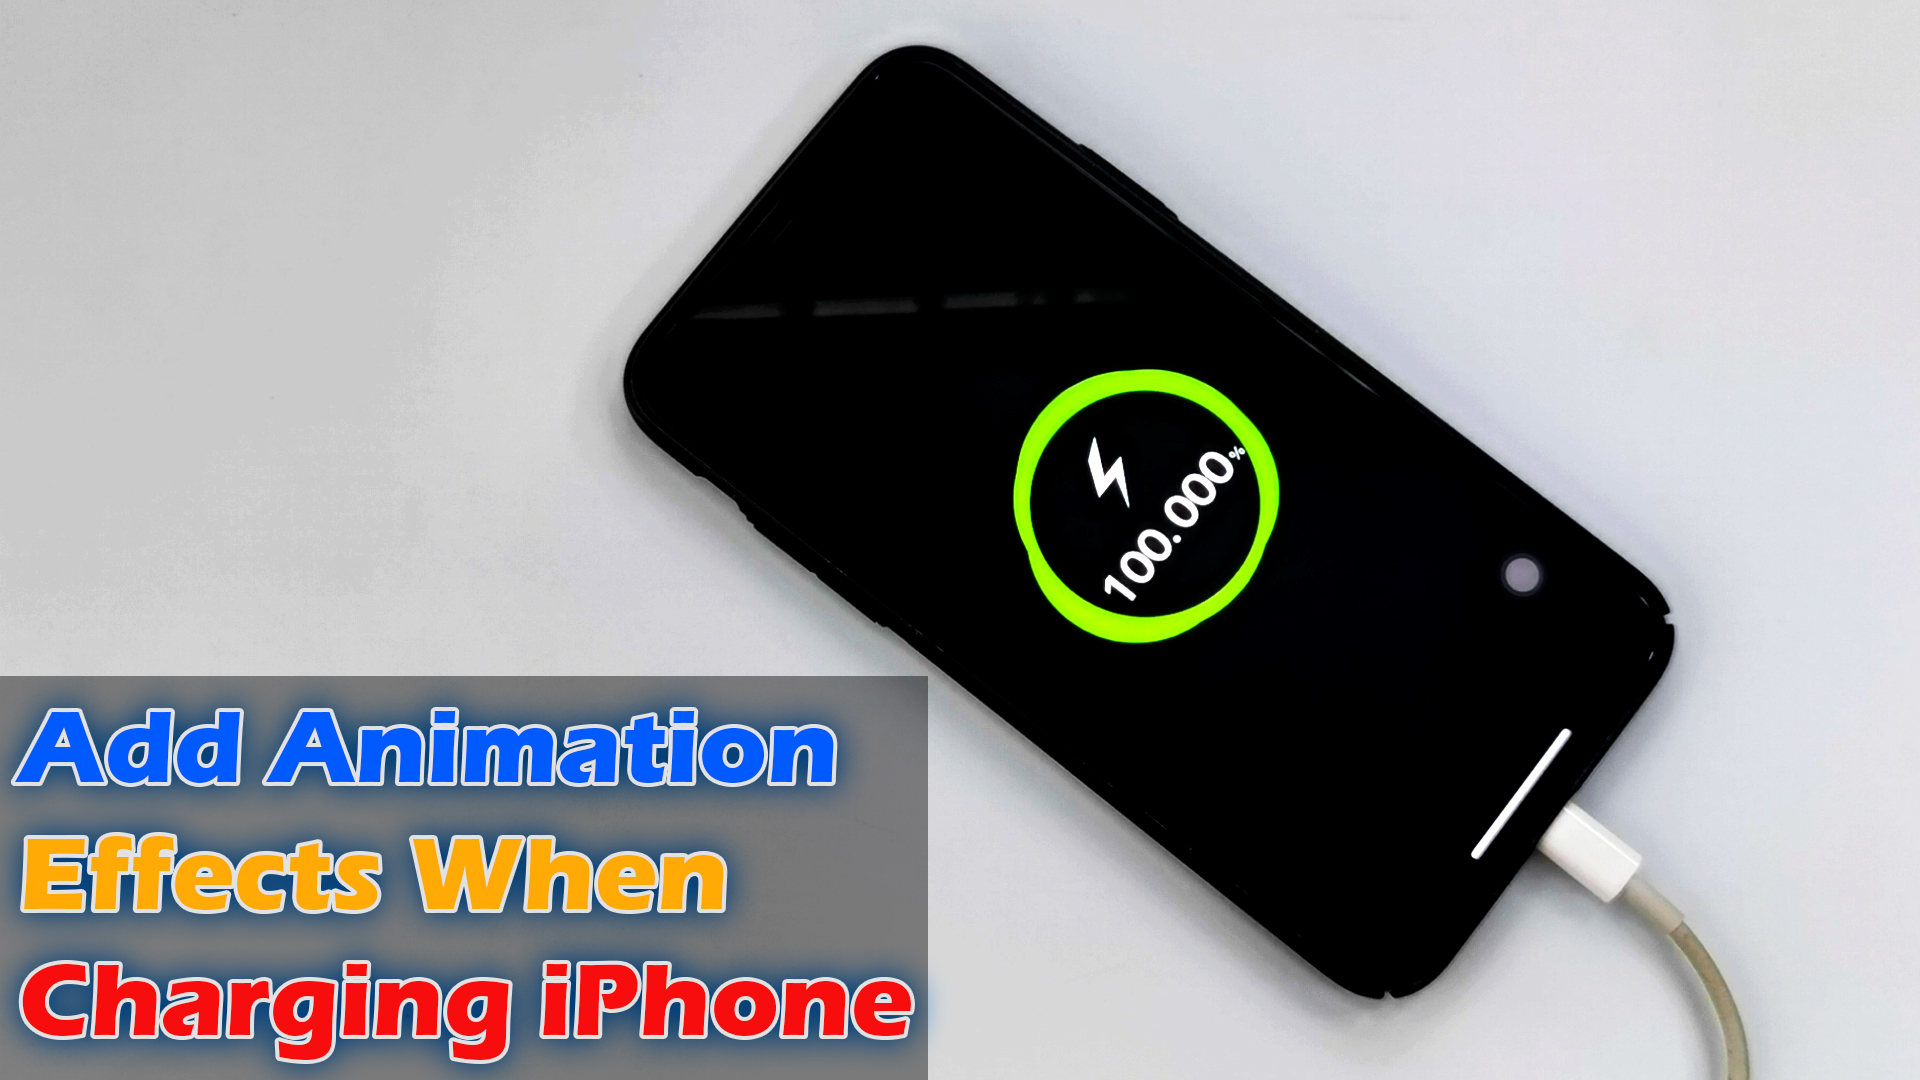 How to Add Animation Effects When Charging iPhone - ICTfix